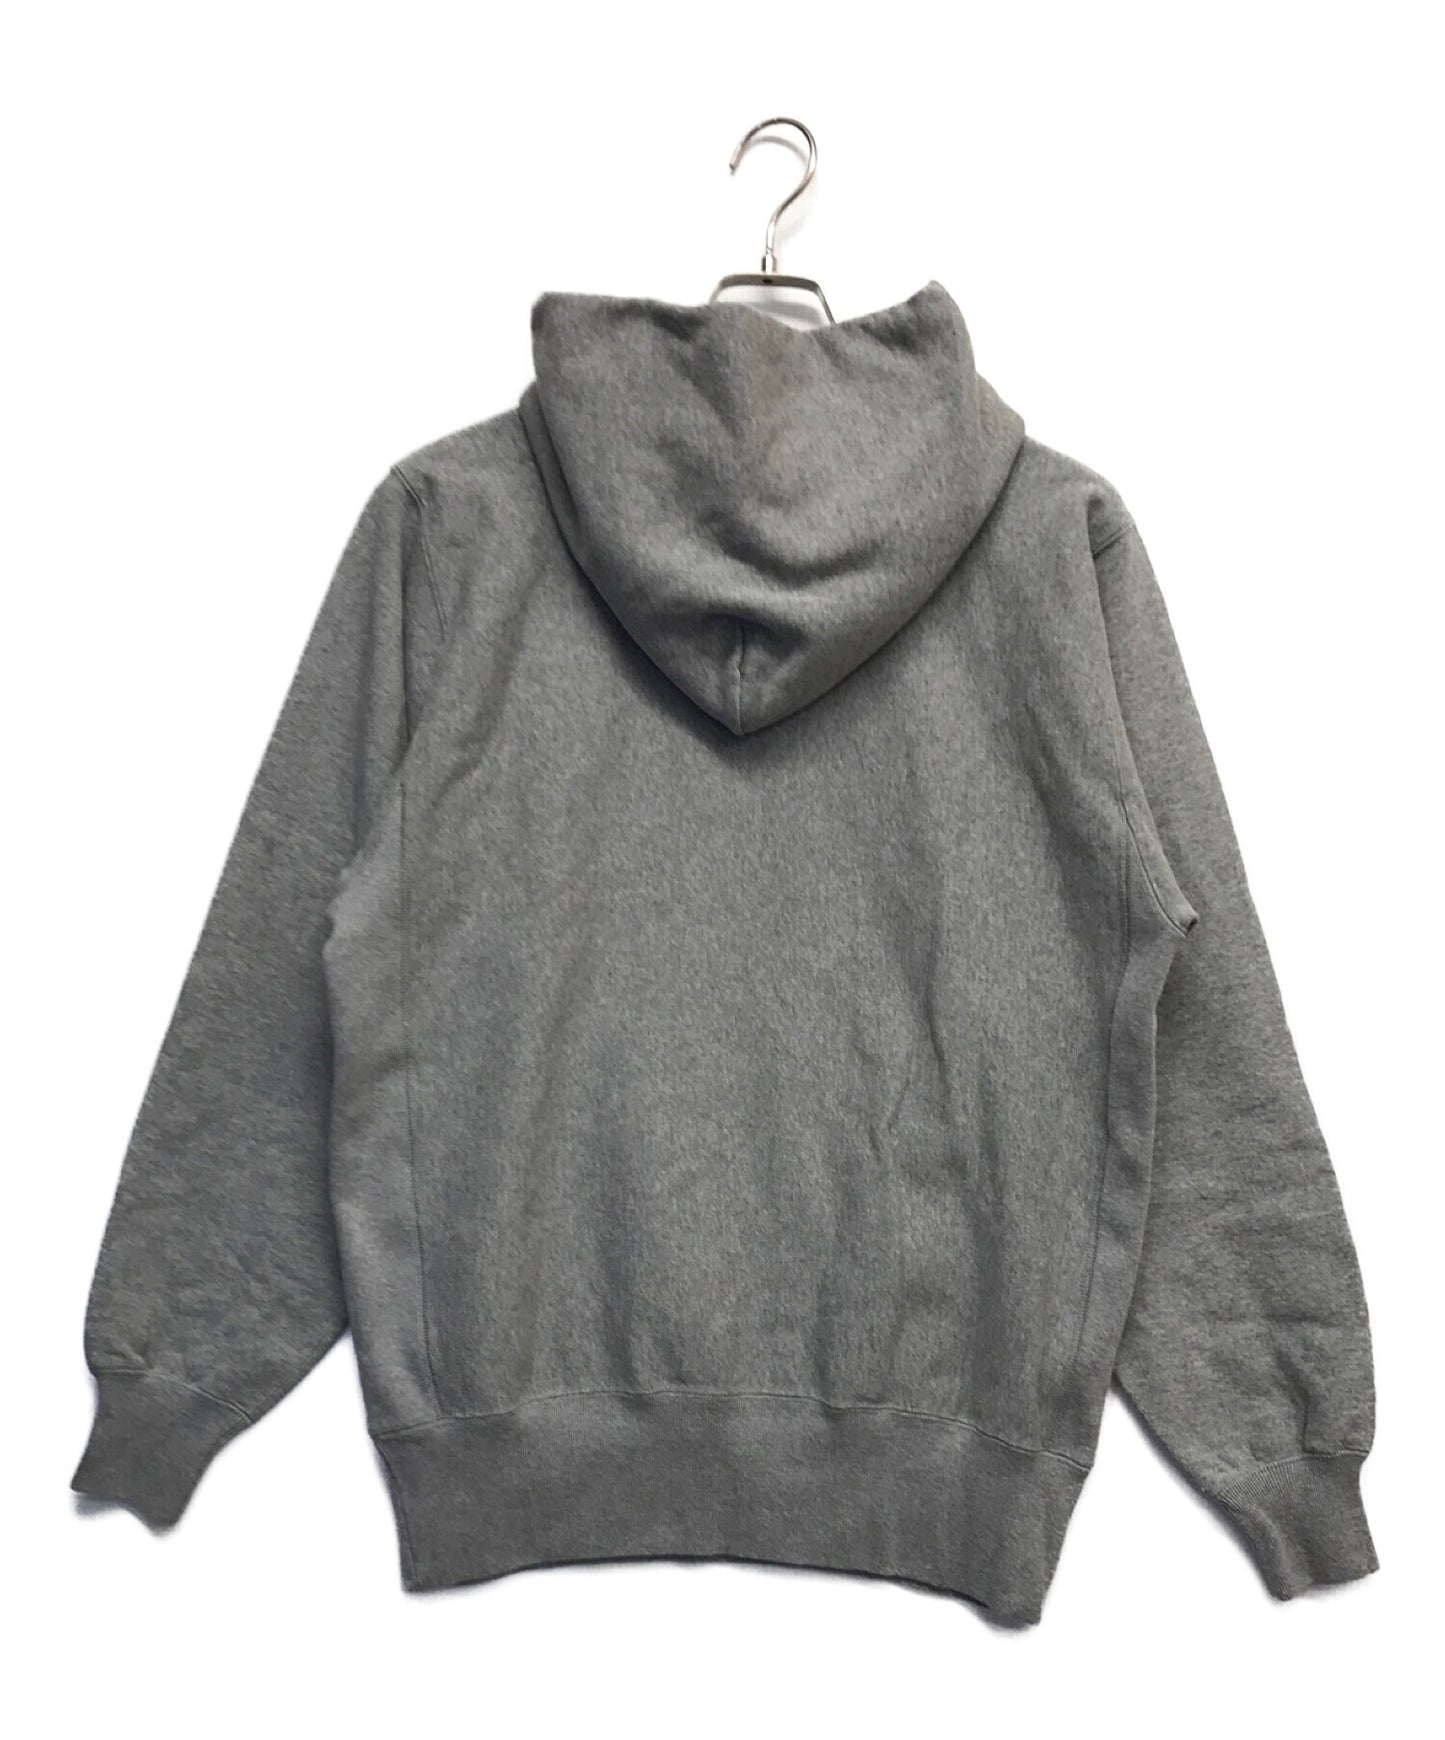 [Pre-owned] UNDERCOVER× HUMAN MADE PIZZA HOODIE LAST ORGY 2 GDC Sweatshirt Hoodie Sweatshirt Hoodie UC1B9805